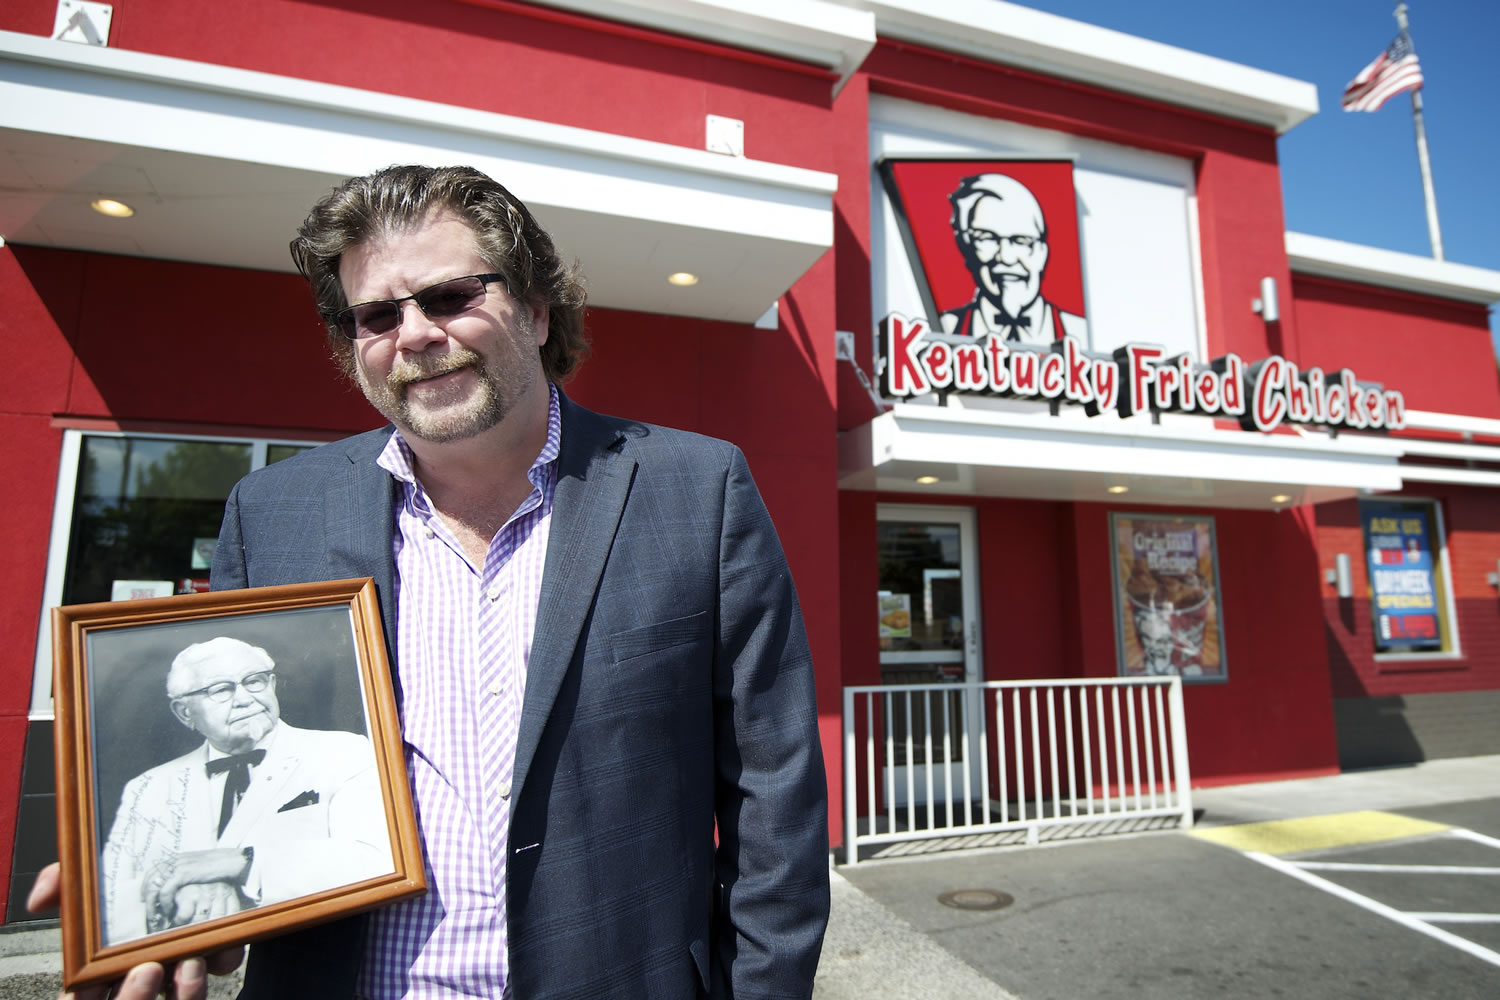 Scott Dickinson, former owner of eight area Kentucky Fried Chicken restaurants, holds a black-and- white photo of KFC founder Col. Harland Sanders. Dickinson is liquidating his KFC business, which operated under the name Dickinson Northwest Inc. Two of the Vancouver restaurants, including the one shown here at 1203 N.E.